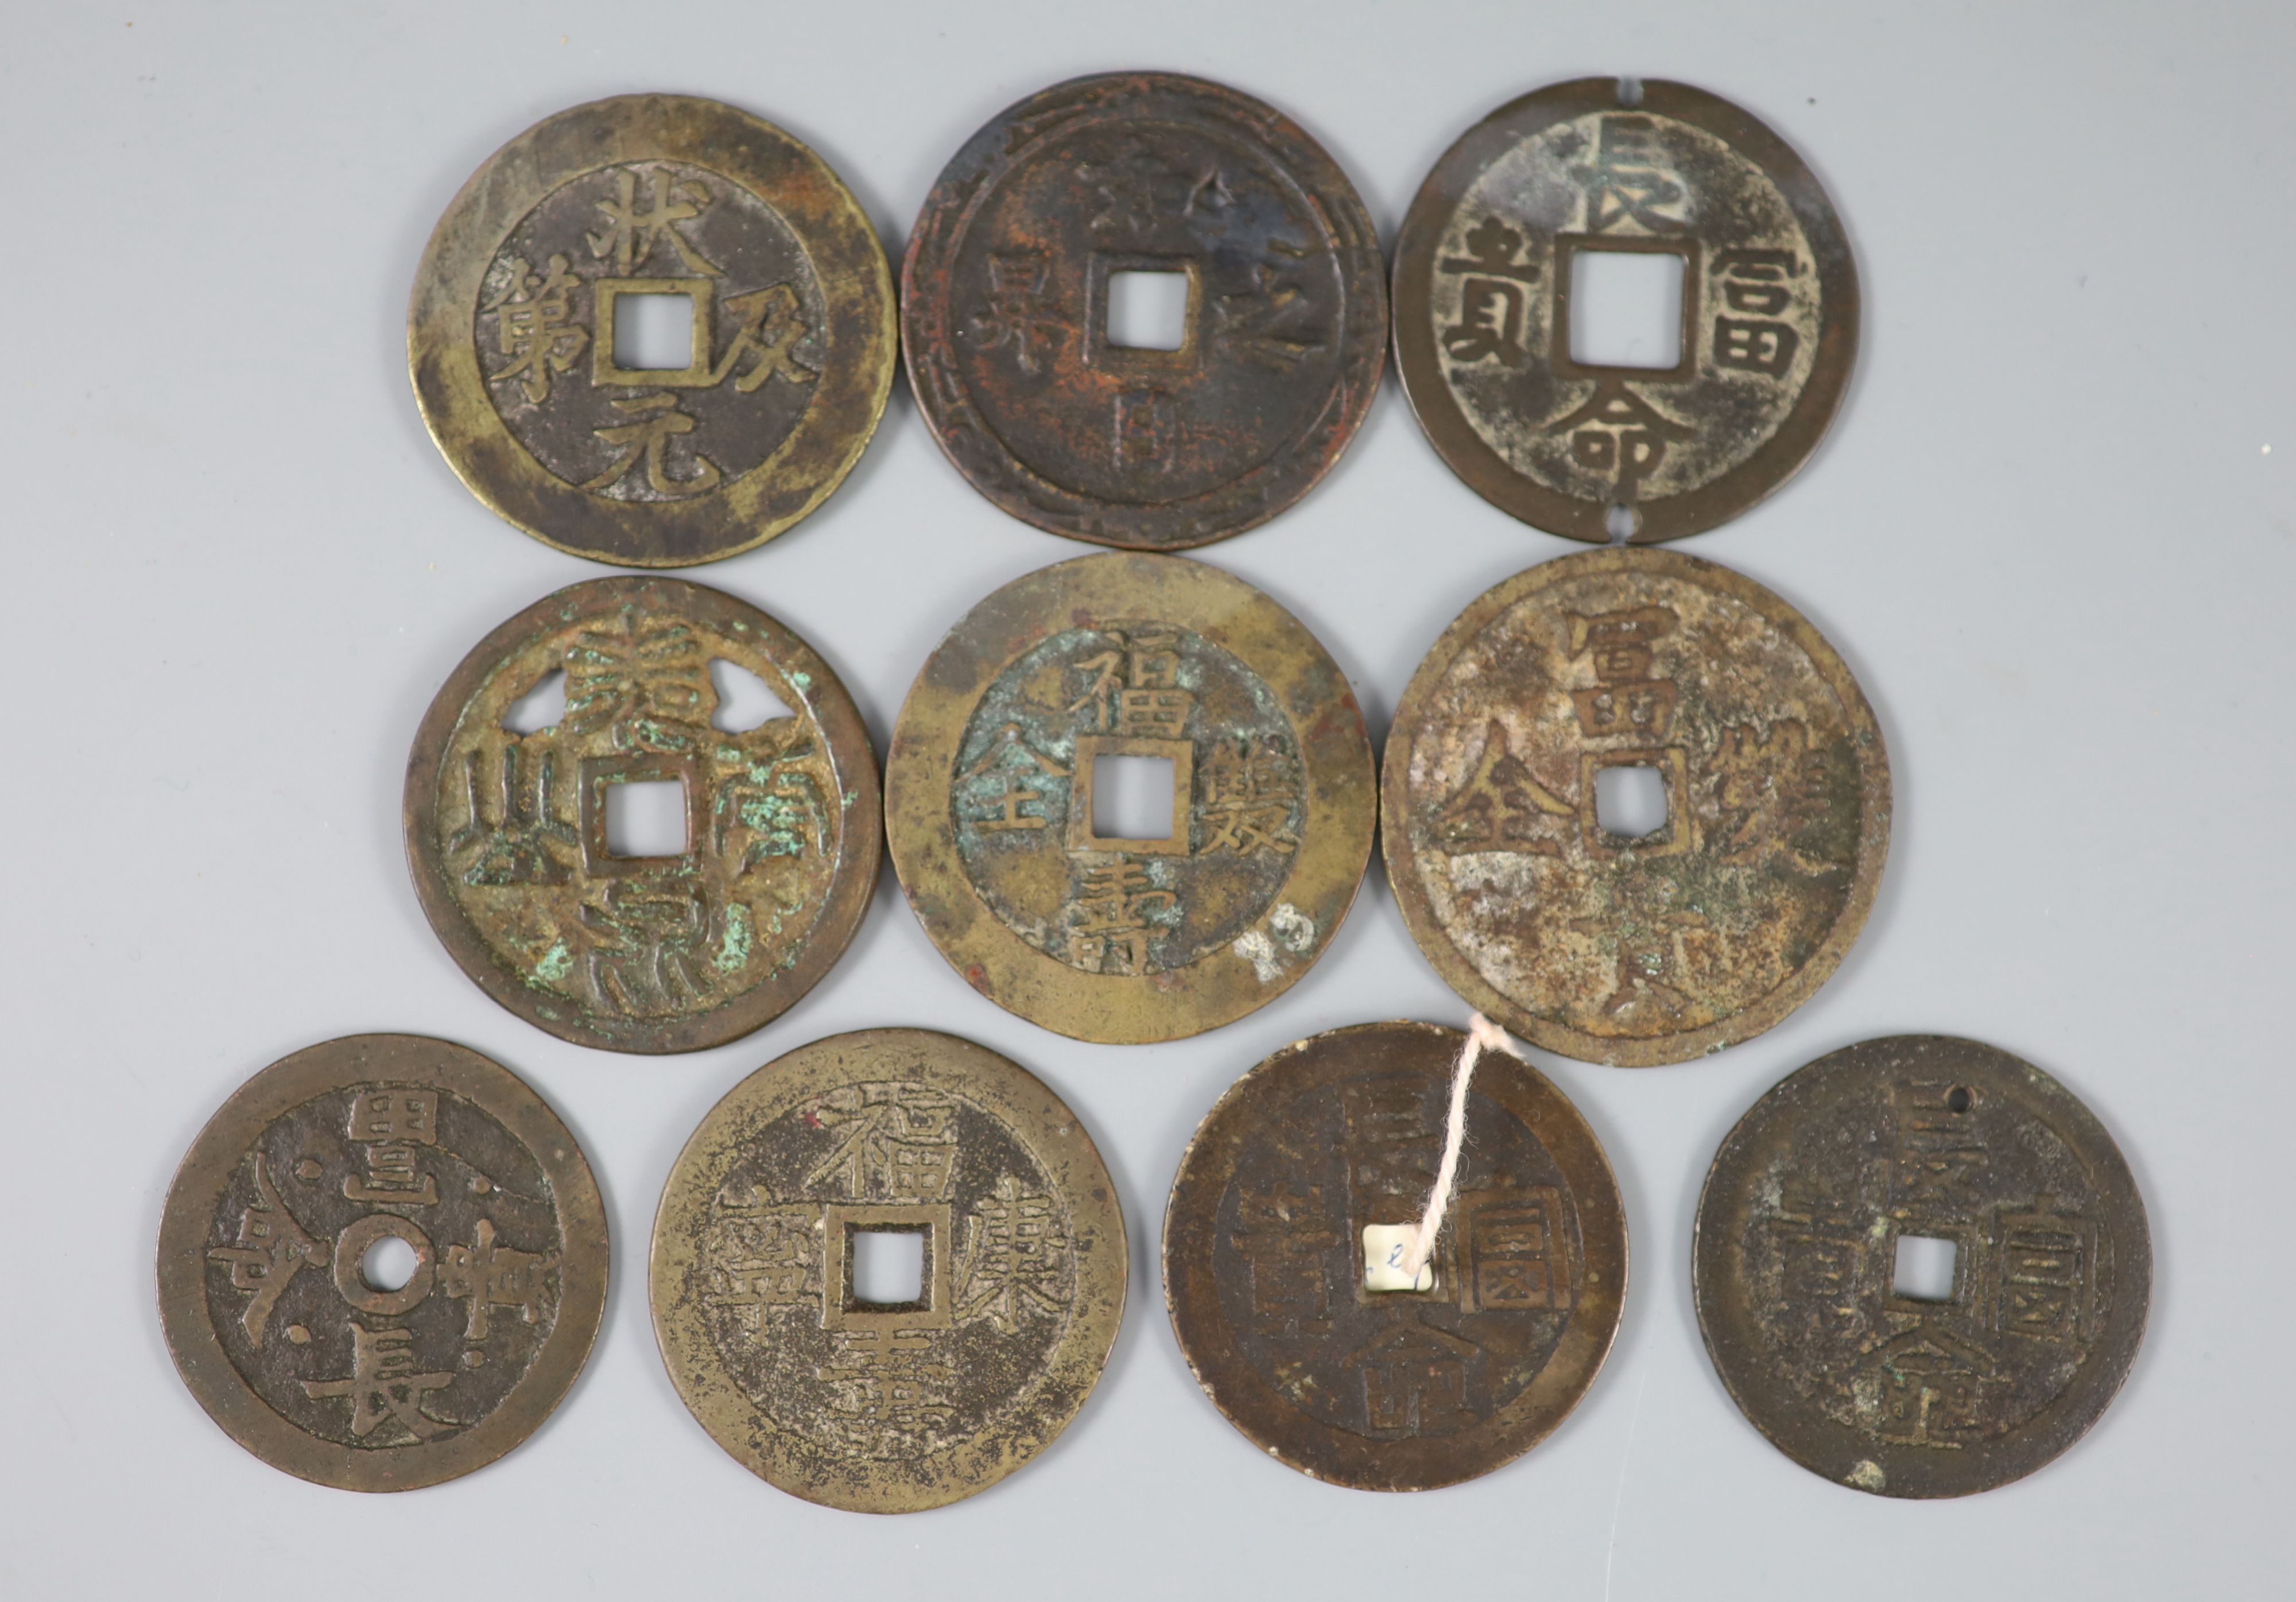 China, 10 bronze or copper charms or amulets, Qing dynasty, all with four character inscription